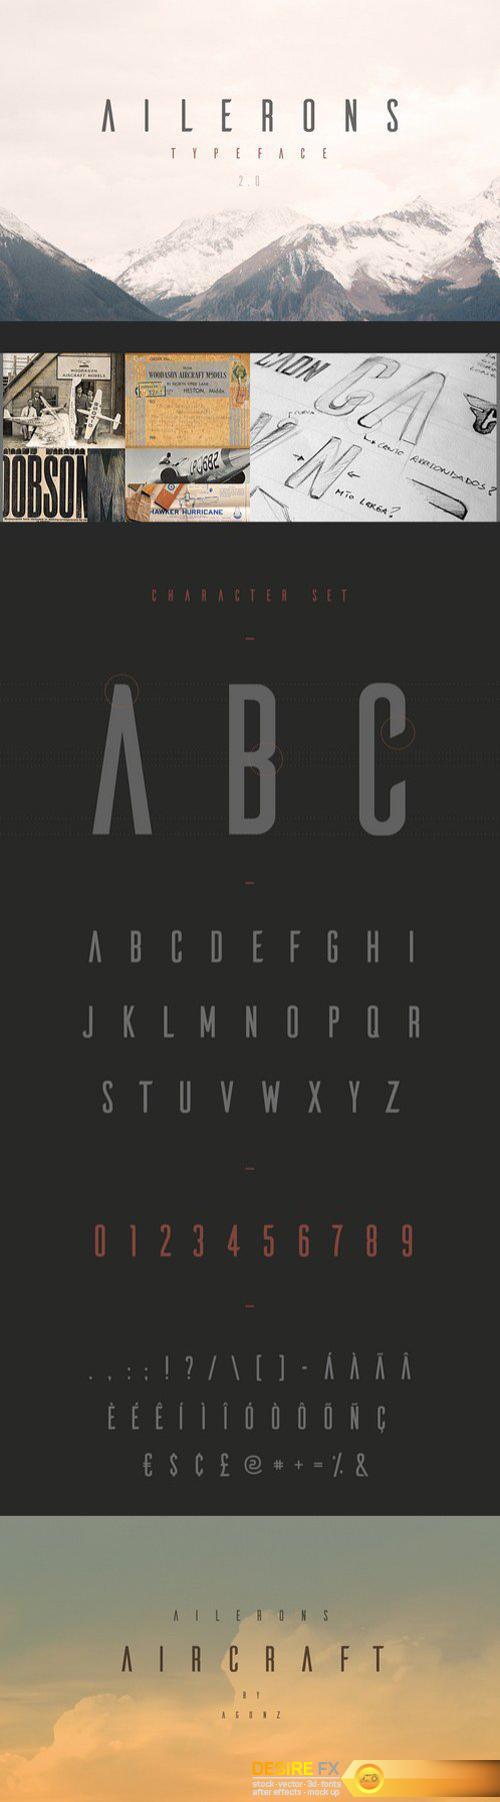 Ailerons Typeface V 2.0